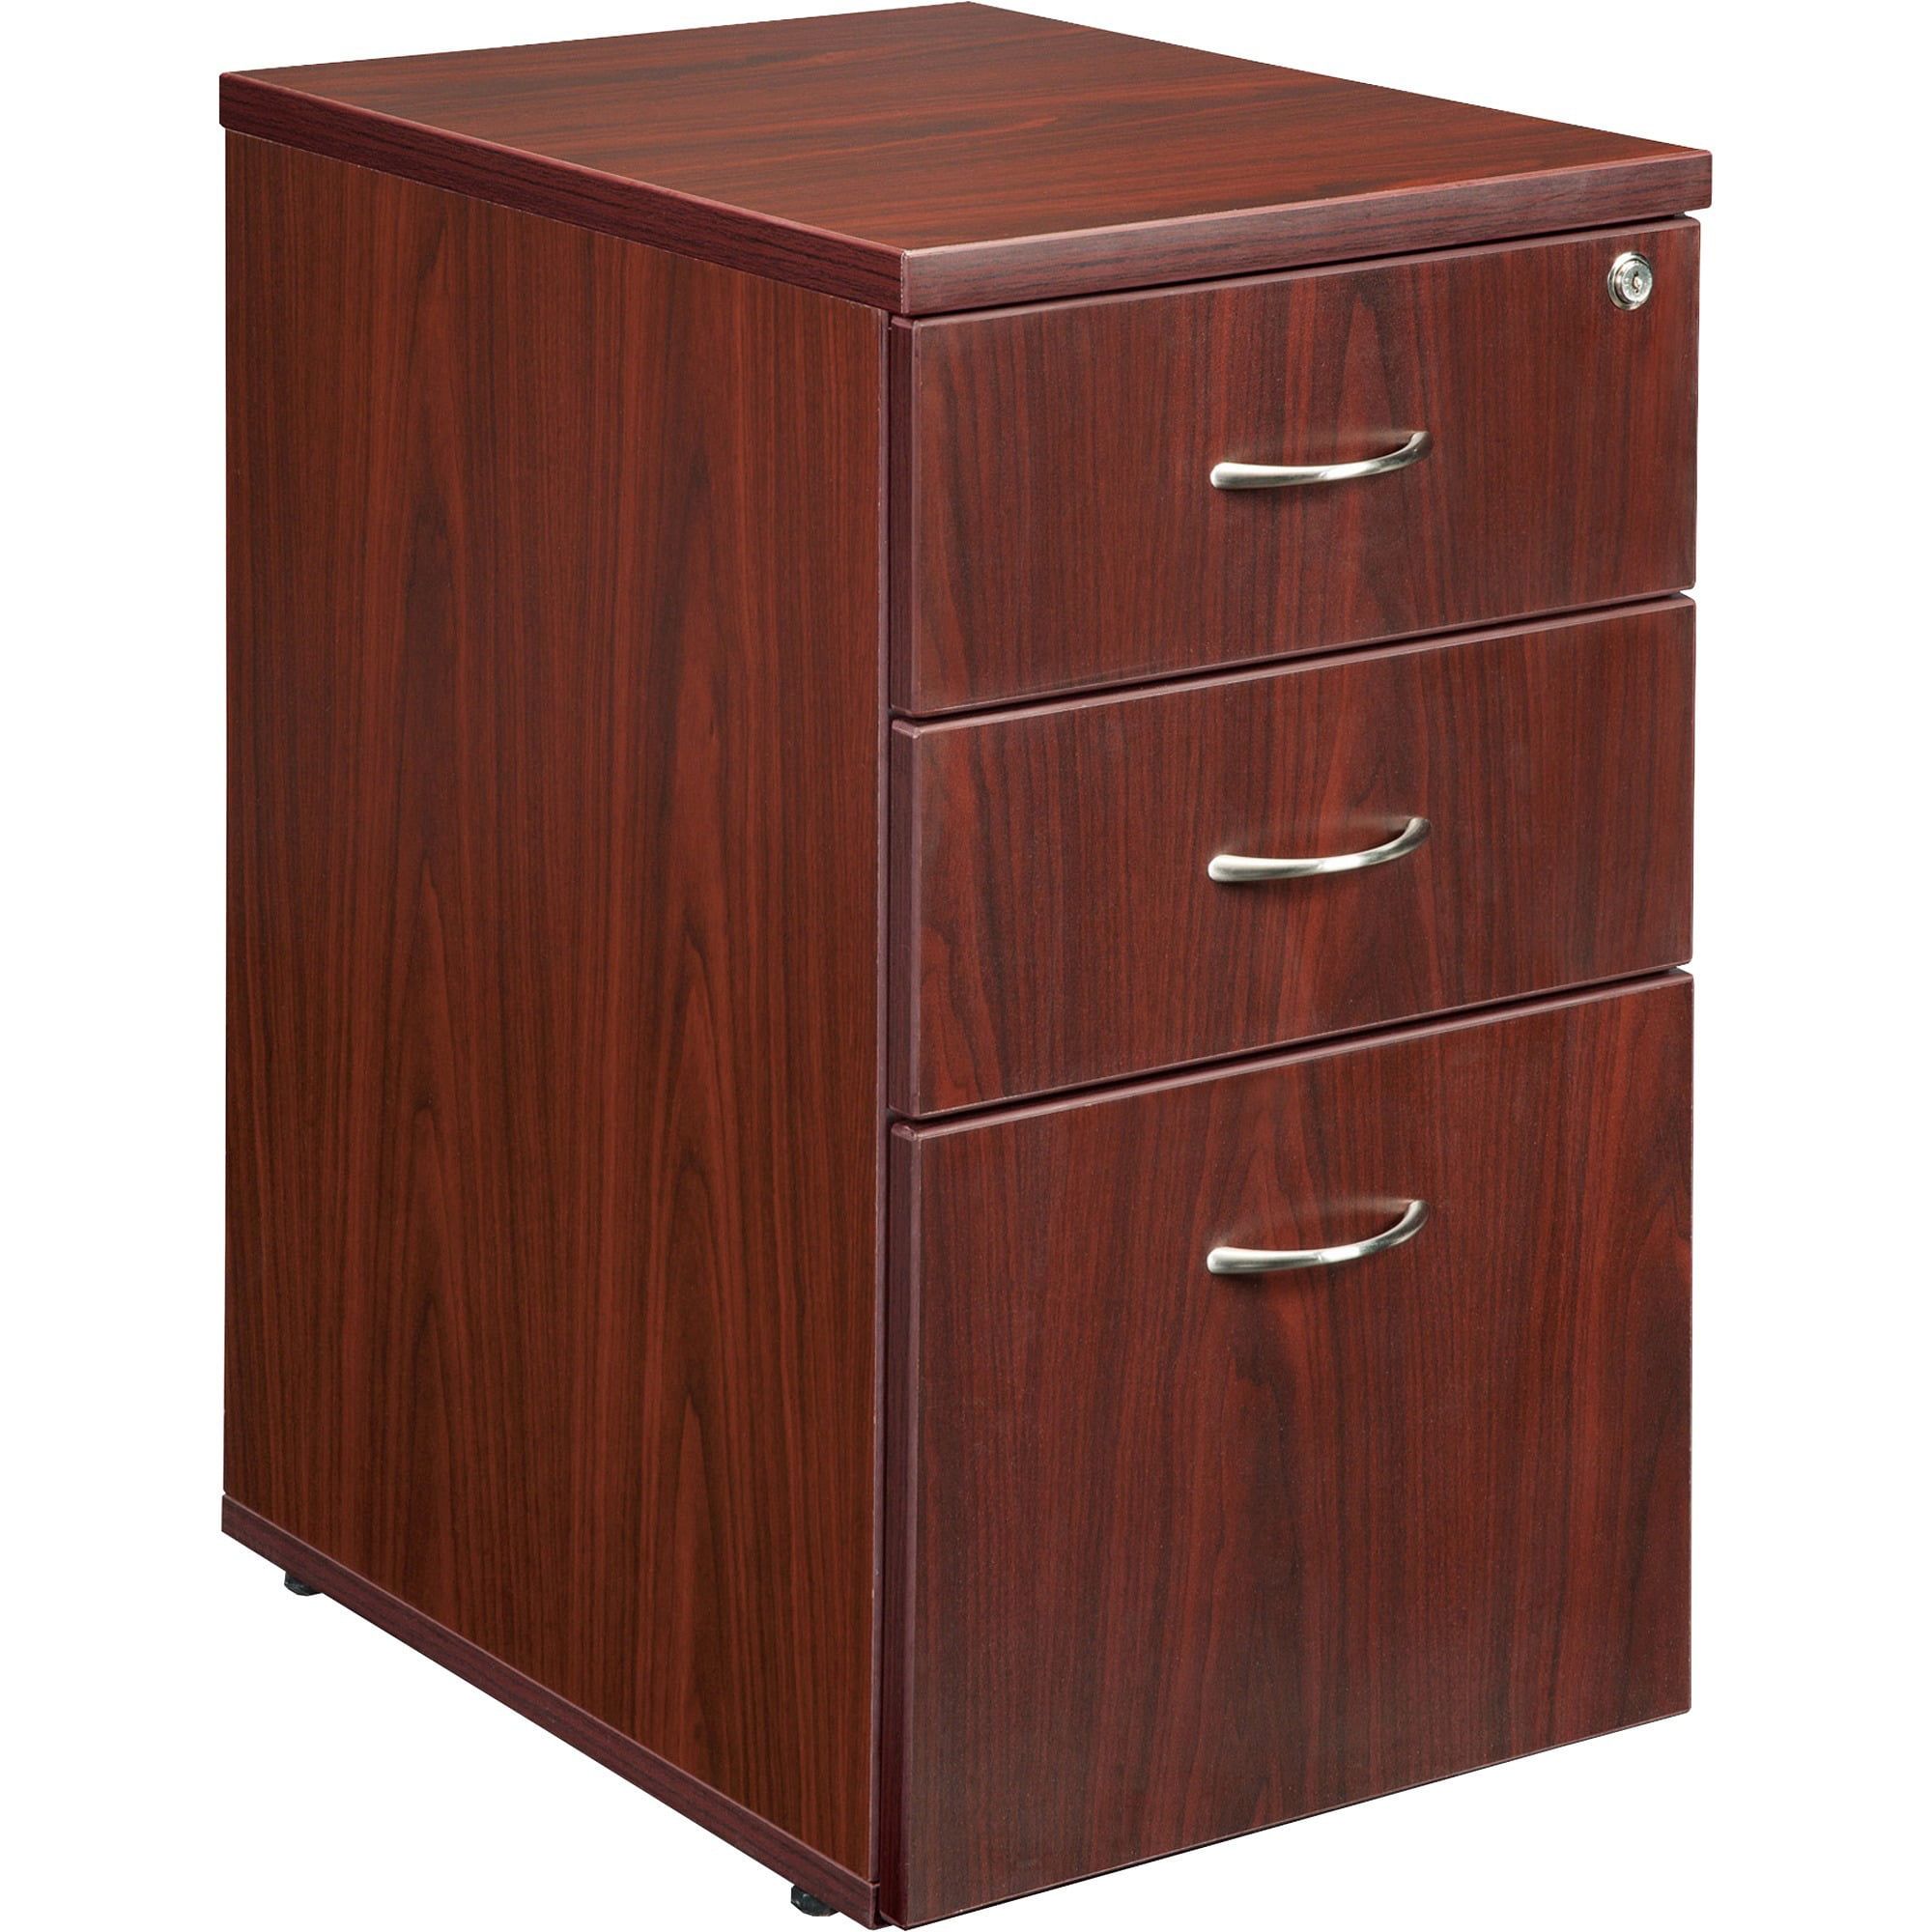 3 Drawers Vertical Wood Composite Lockable Filing Cabinet, – Walmart Pertaining To Wood Cabinet With Drawers (View 13 of 20)